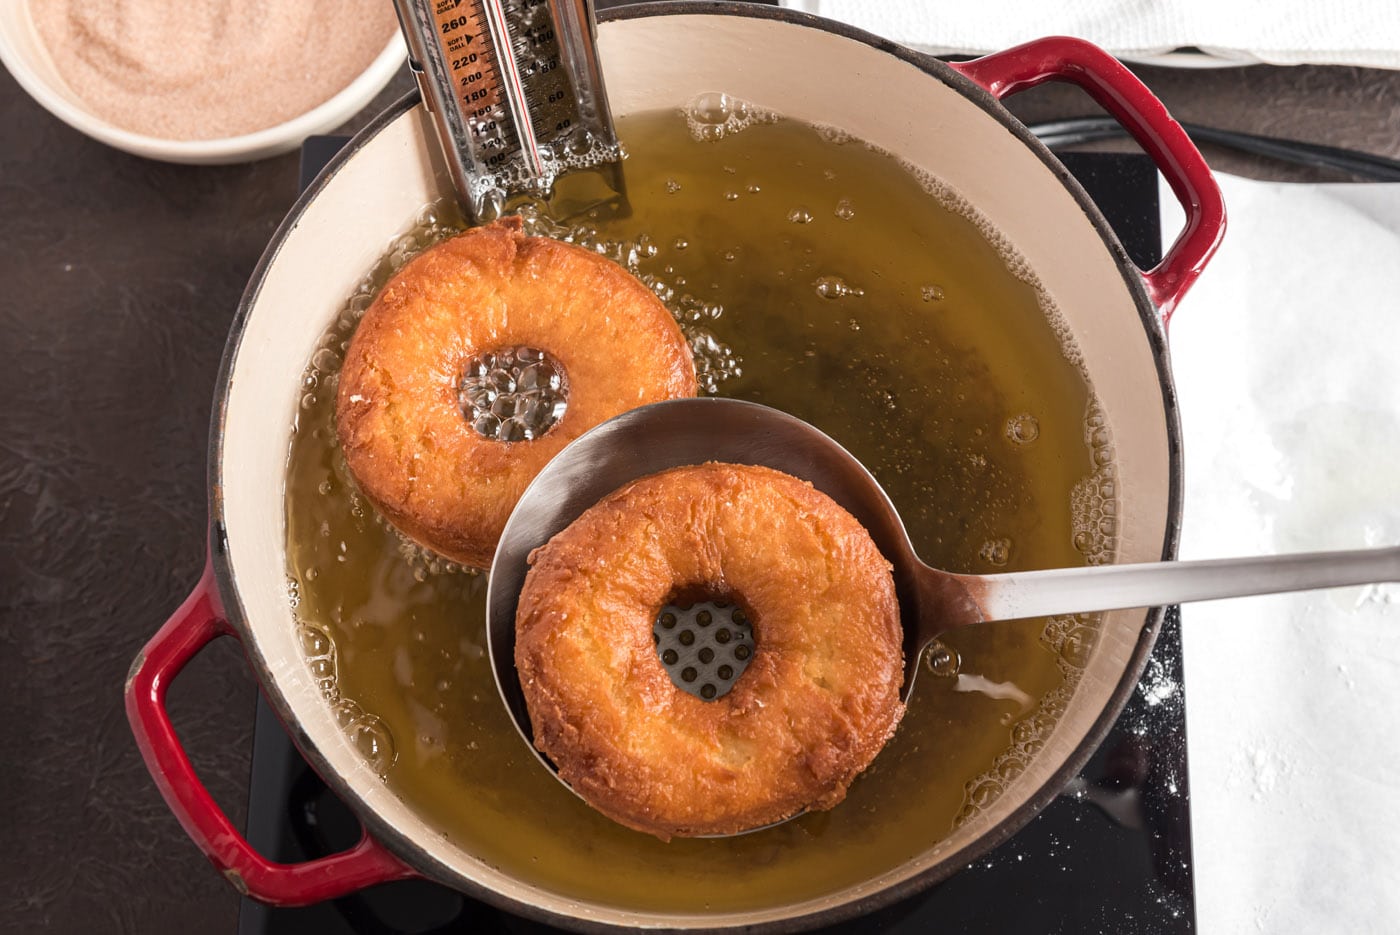 fried donuts being lifted from oil